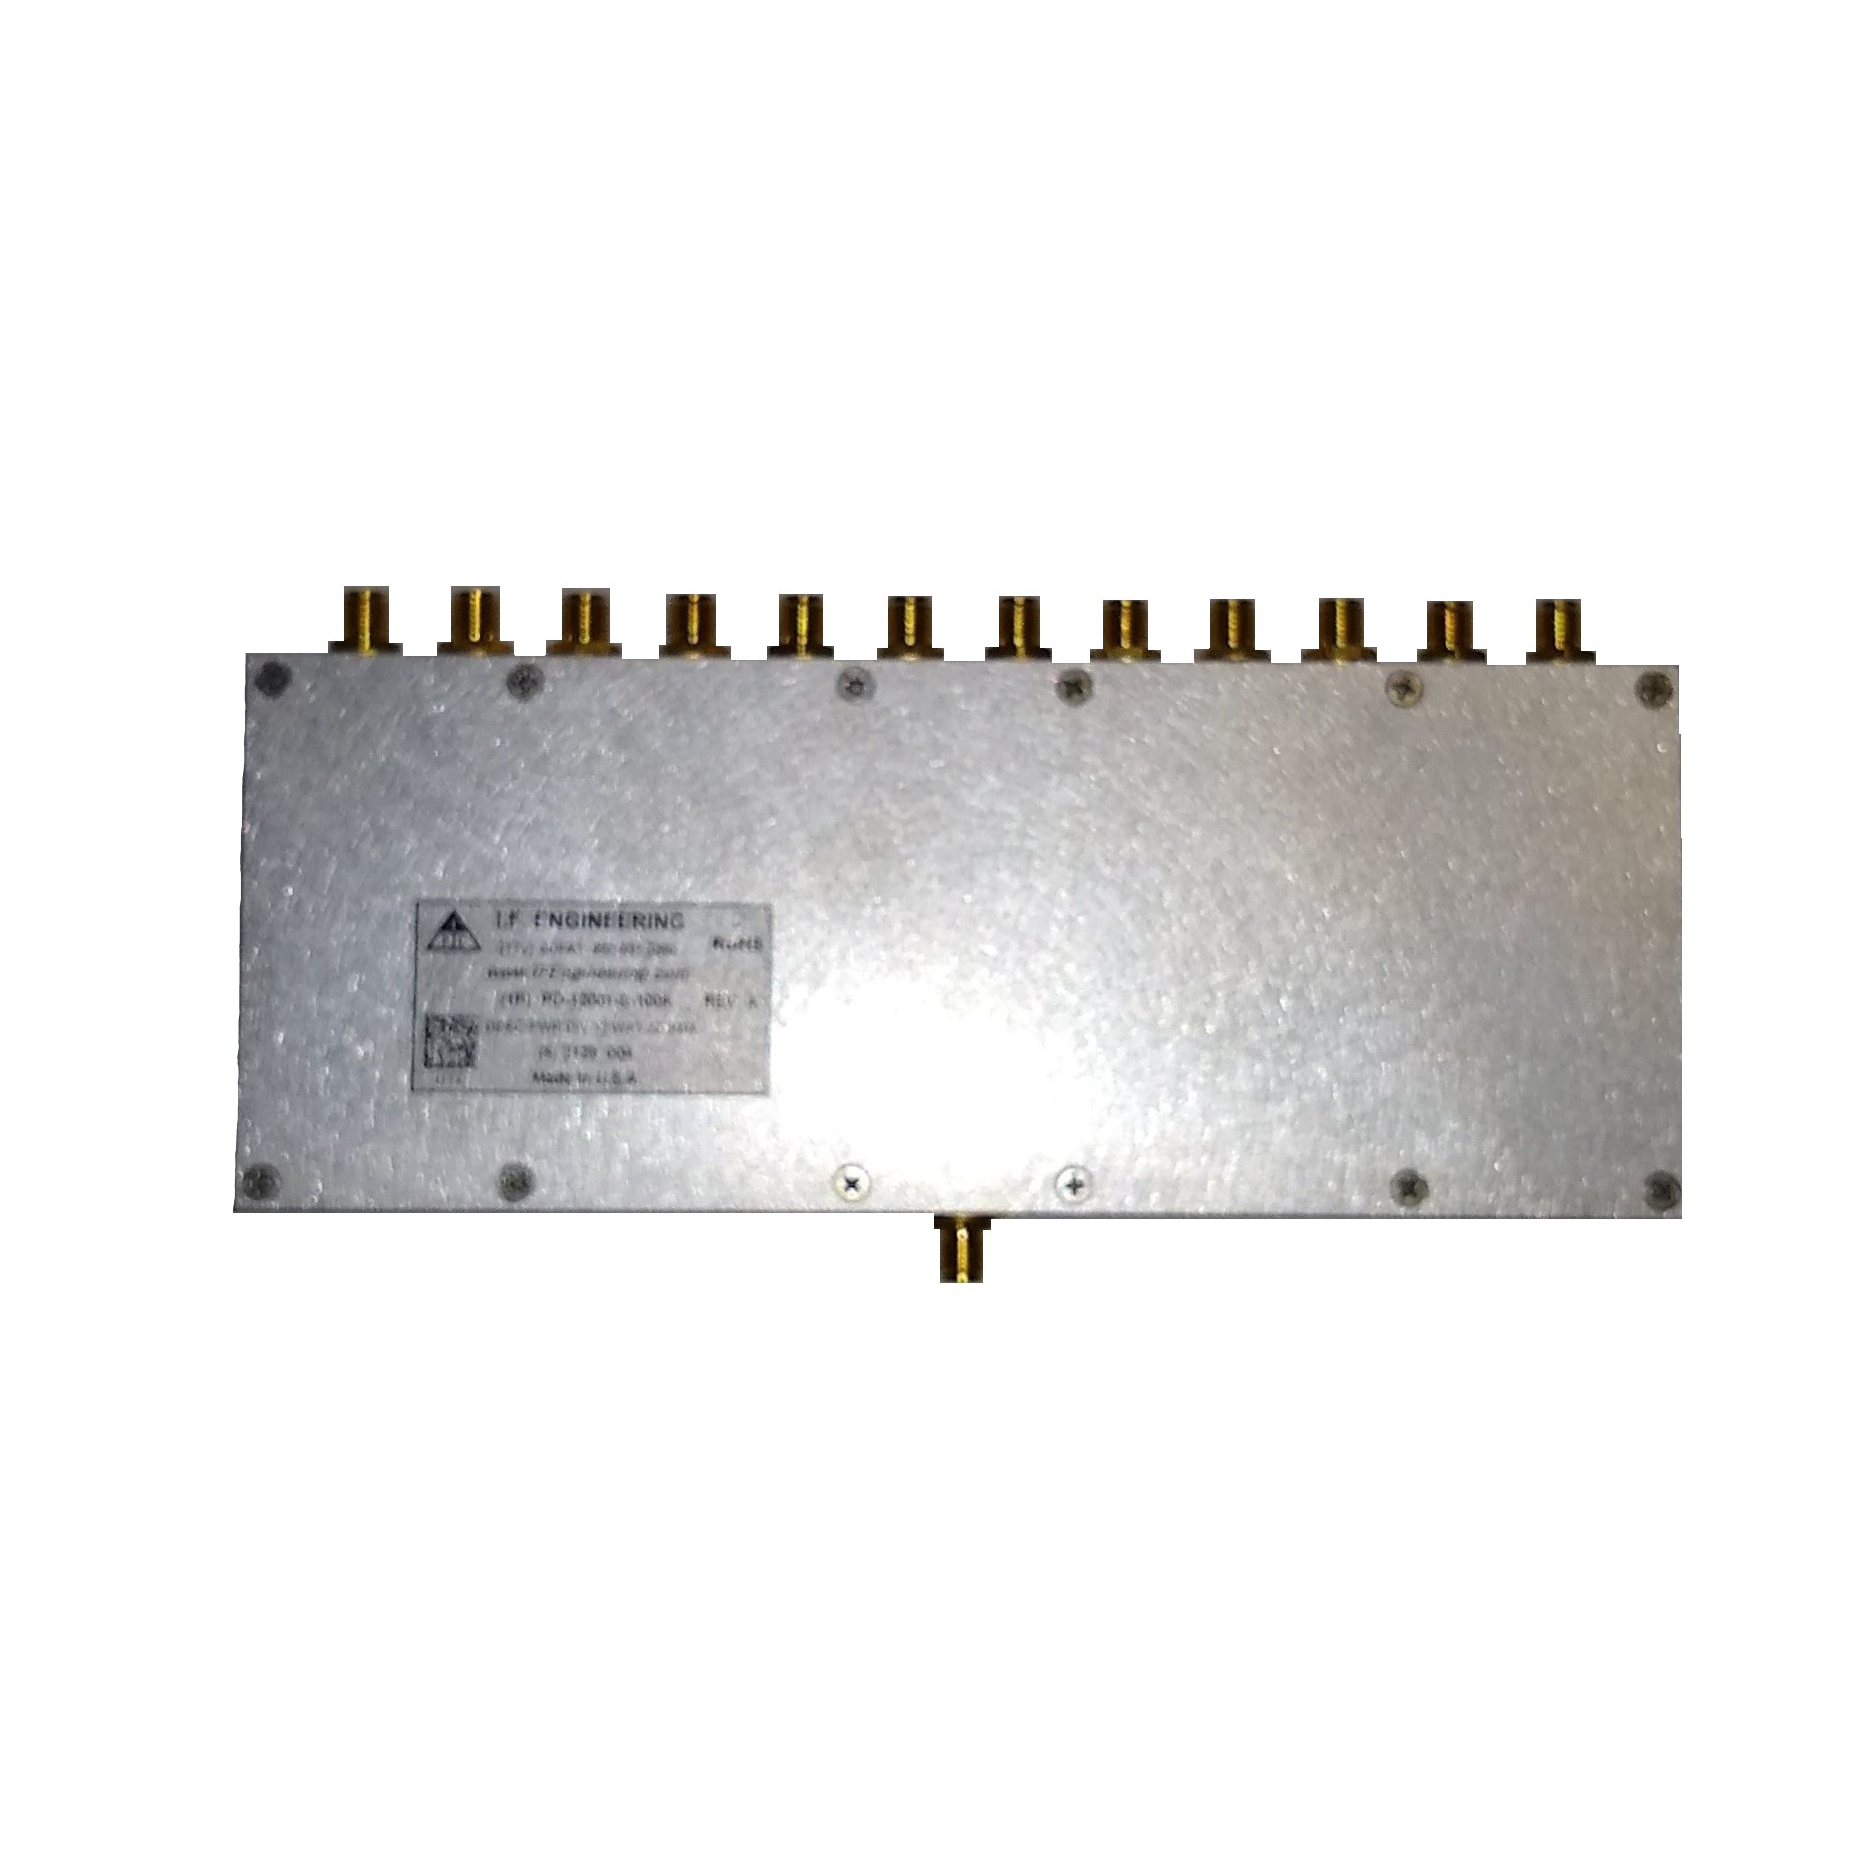 the part number is PD-12001-S-100K